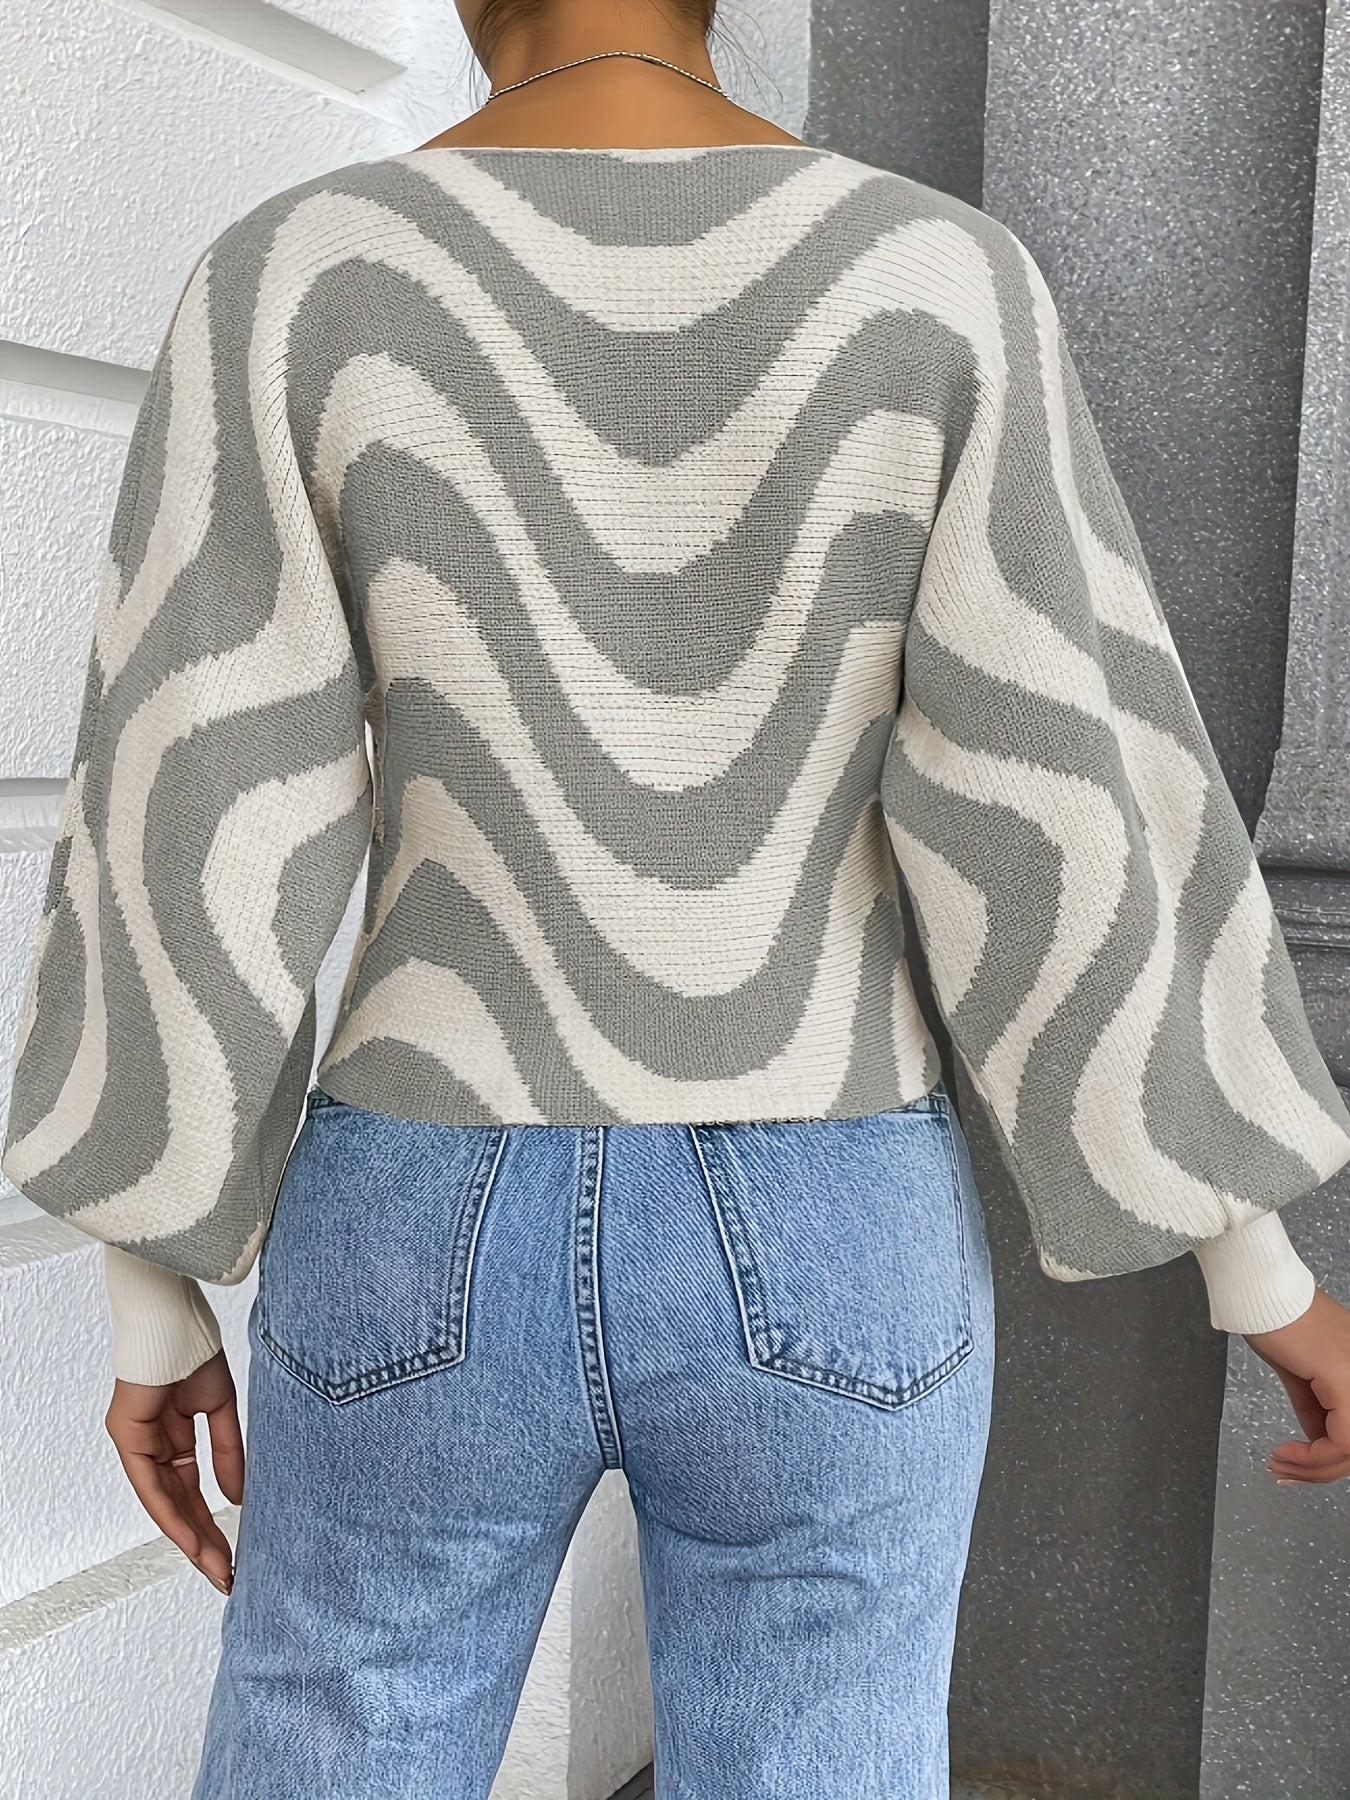 Antmvs Striped Boat Neck Pullover Sweater, Casual Lantern Sleeve Slim Sweater, Women's Clothing